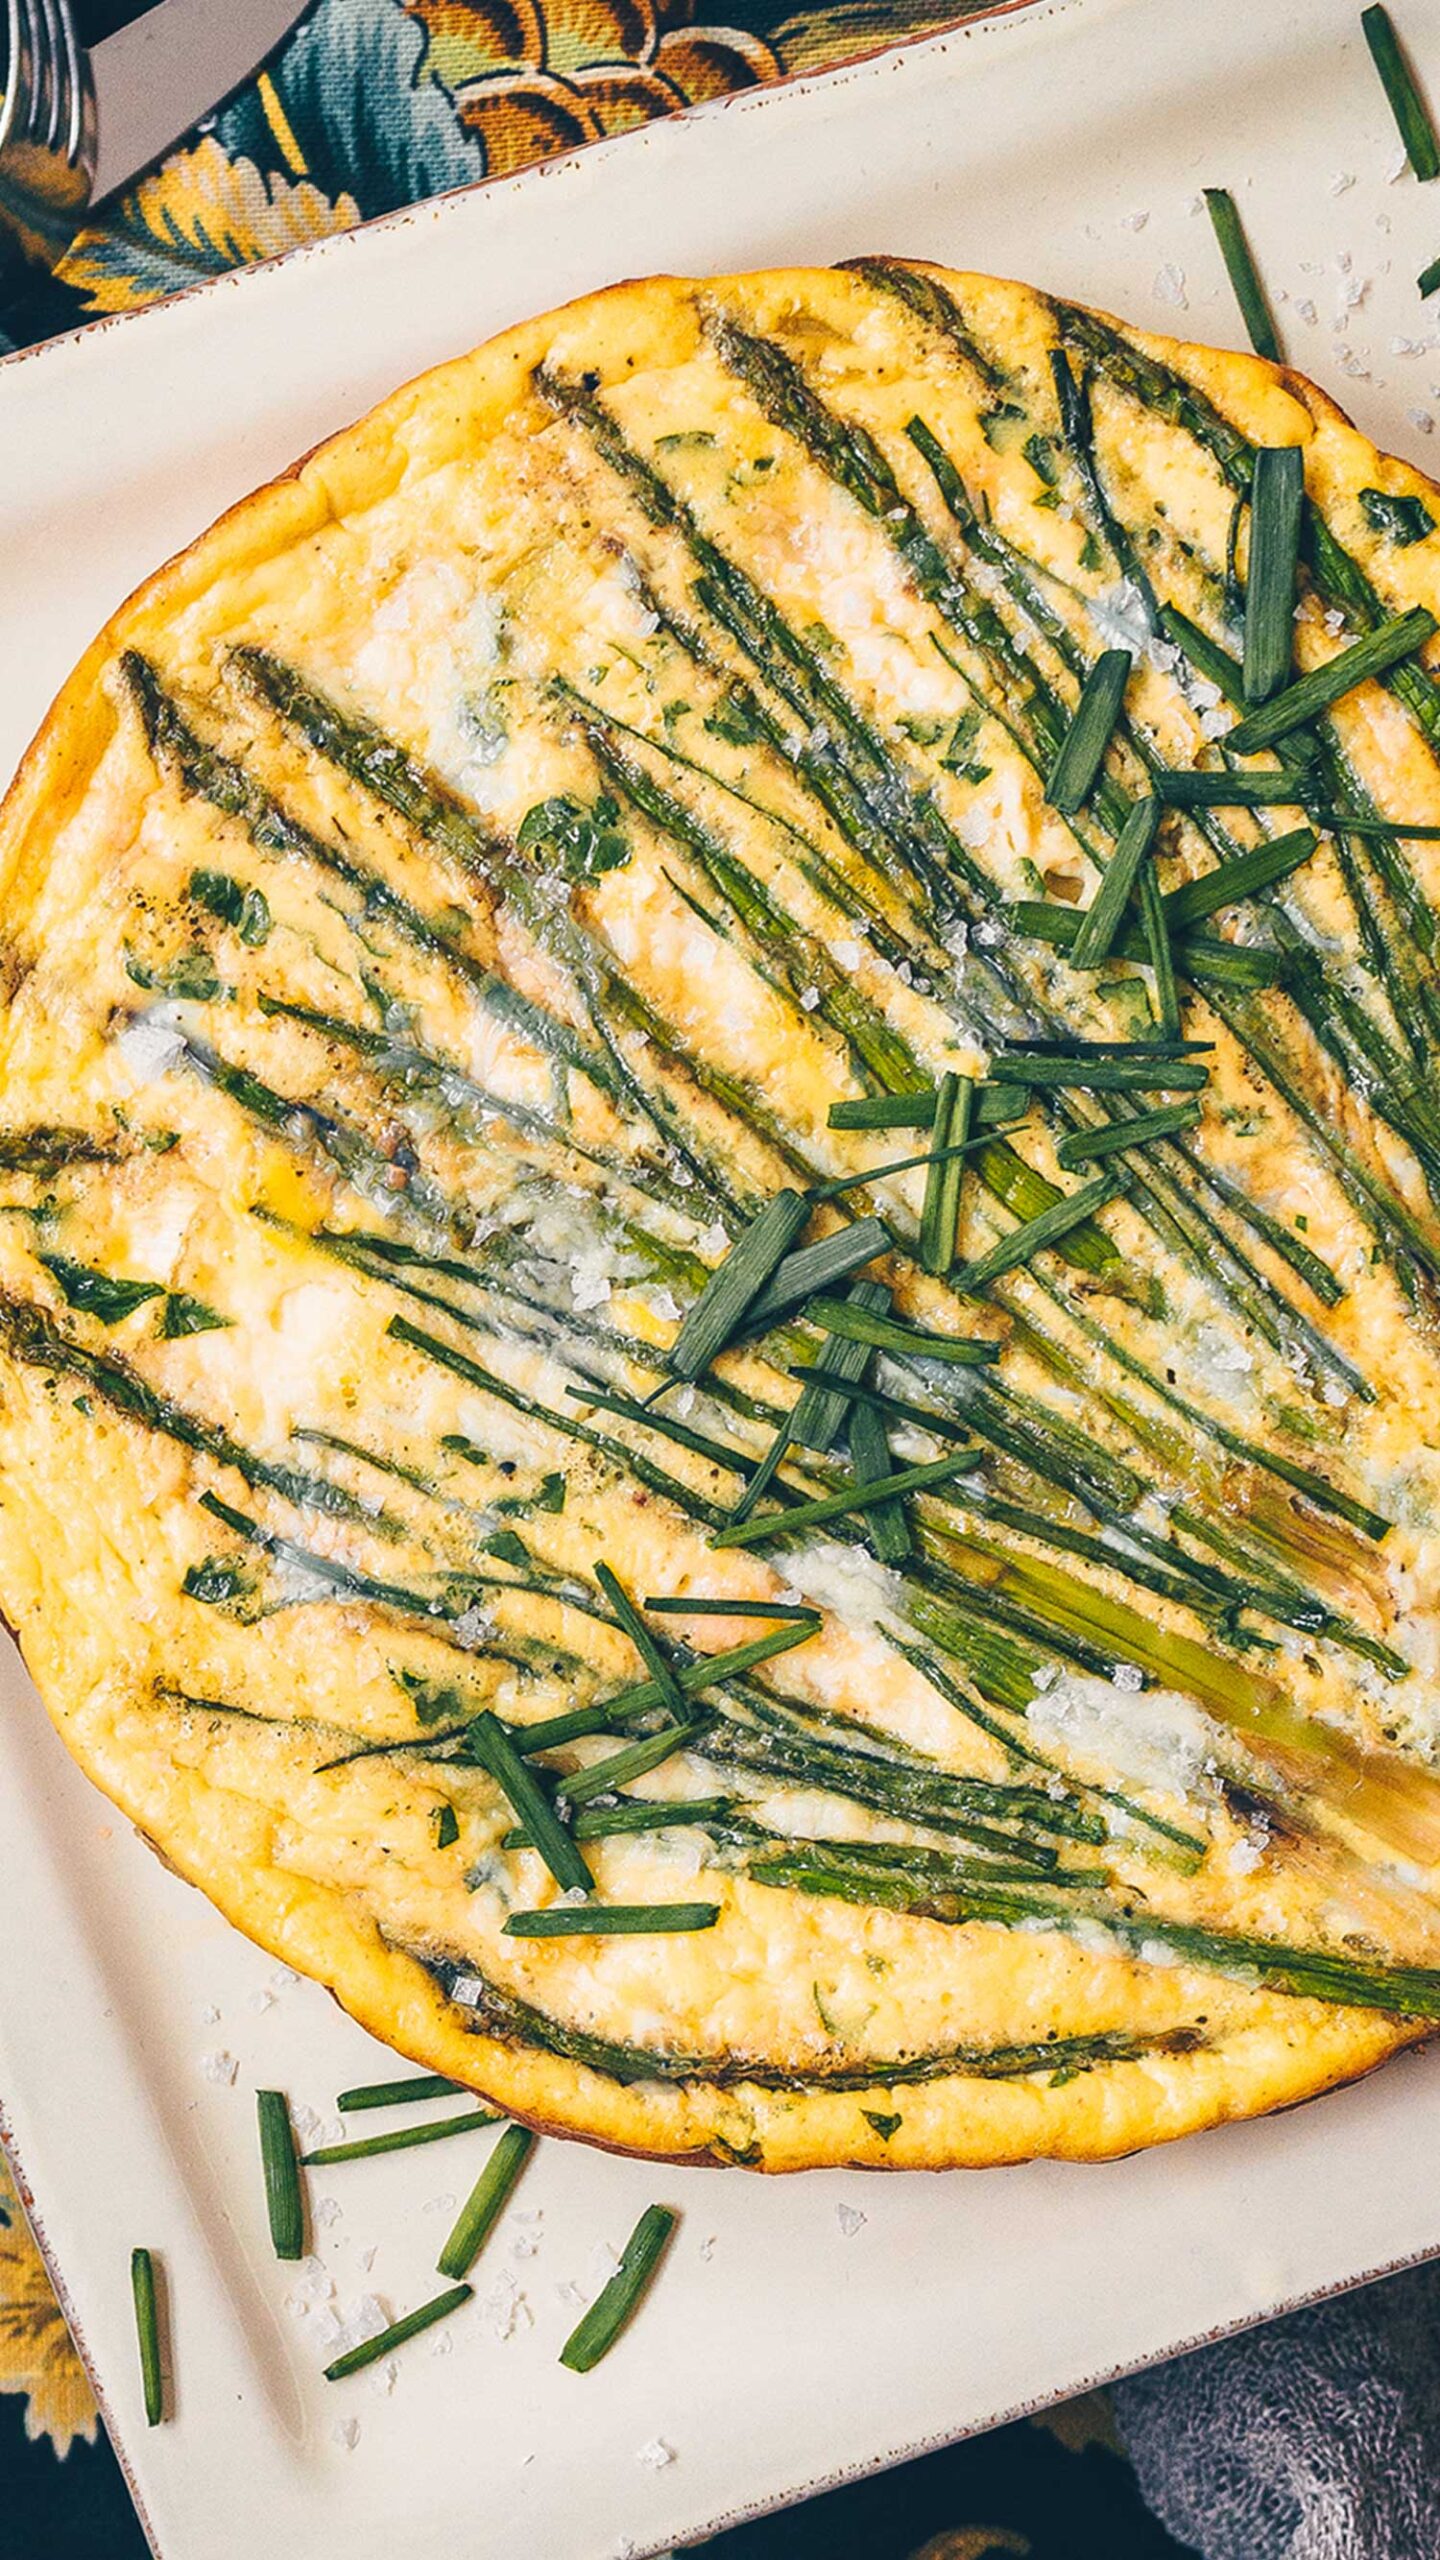 A close up of a large Asparagus frittata with the asparagus spears laid across the top in a wild pattern, and fresh chives across the top.